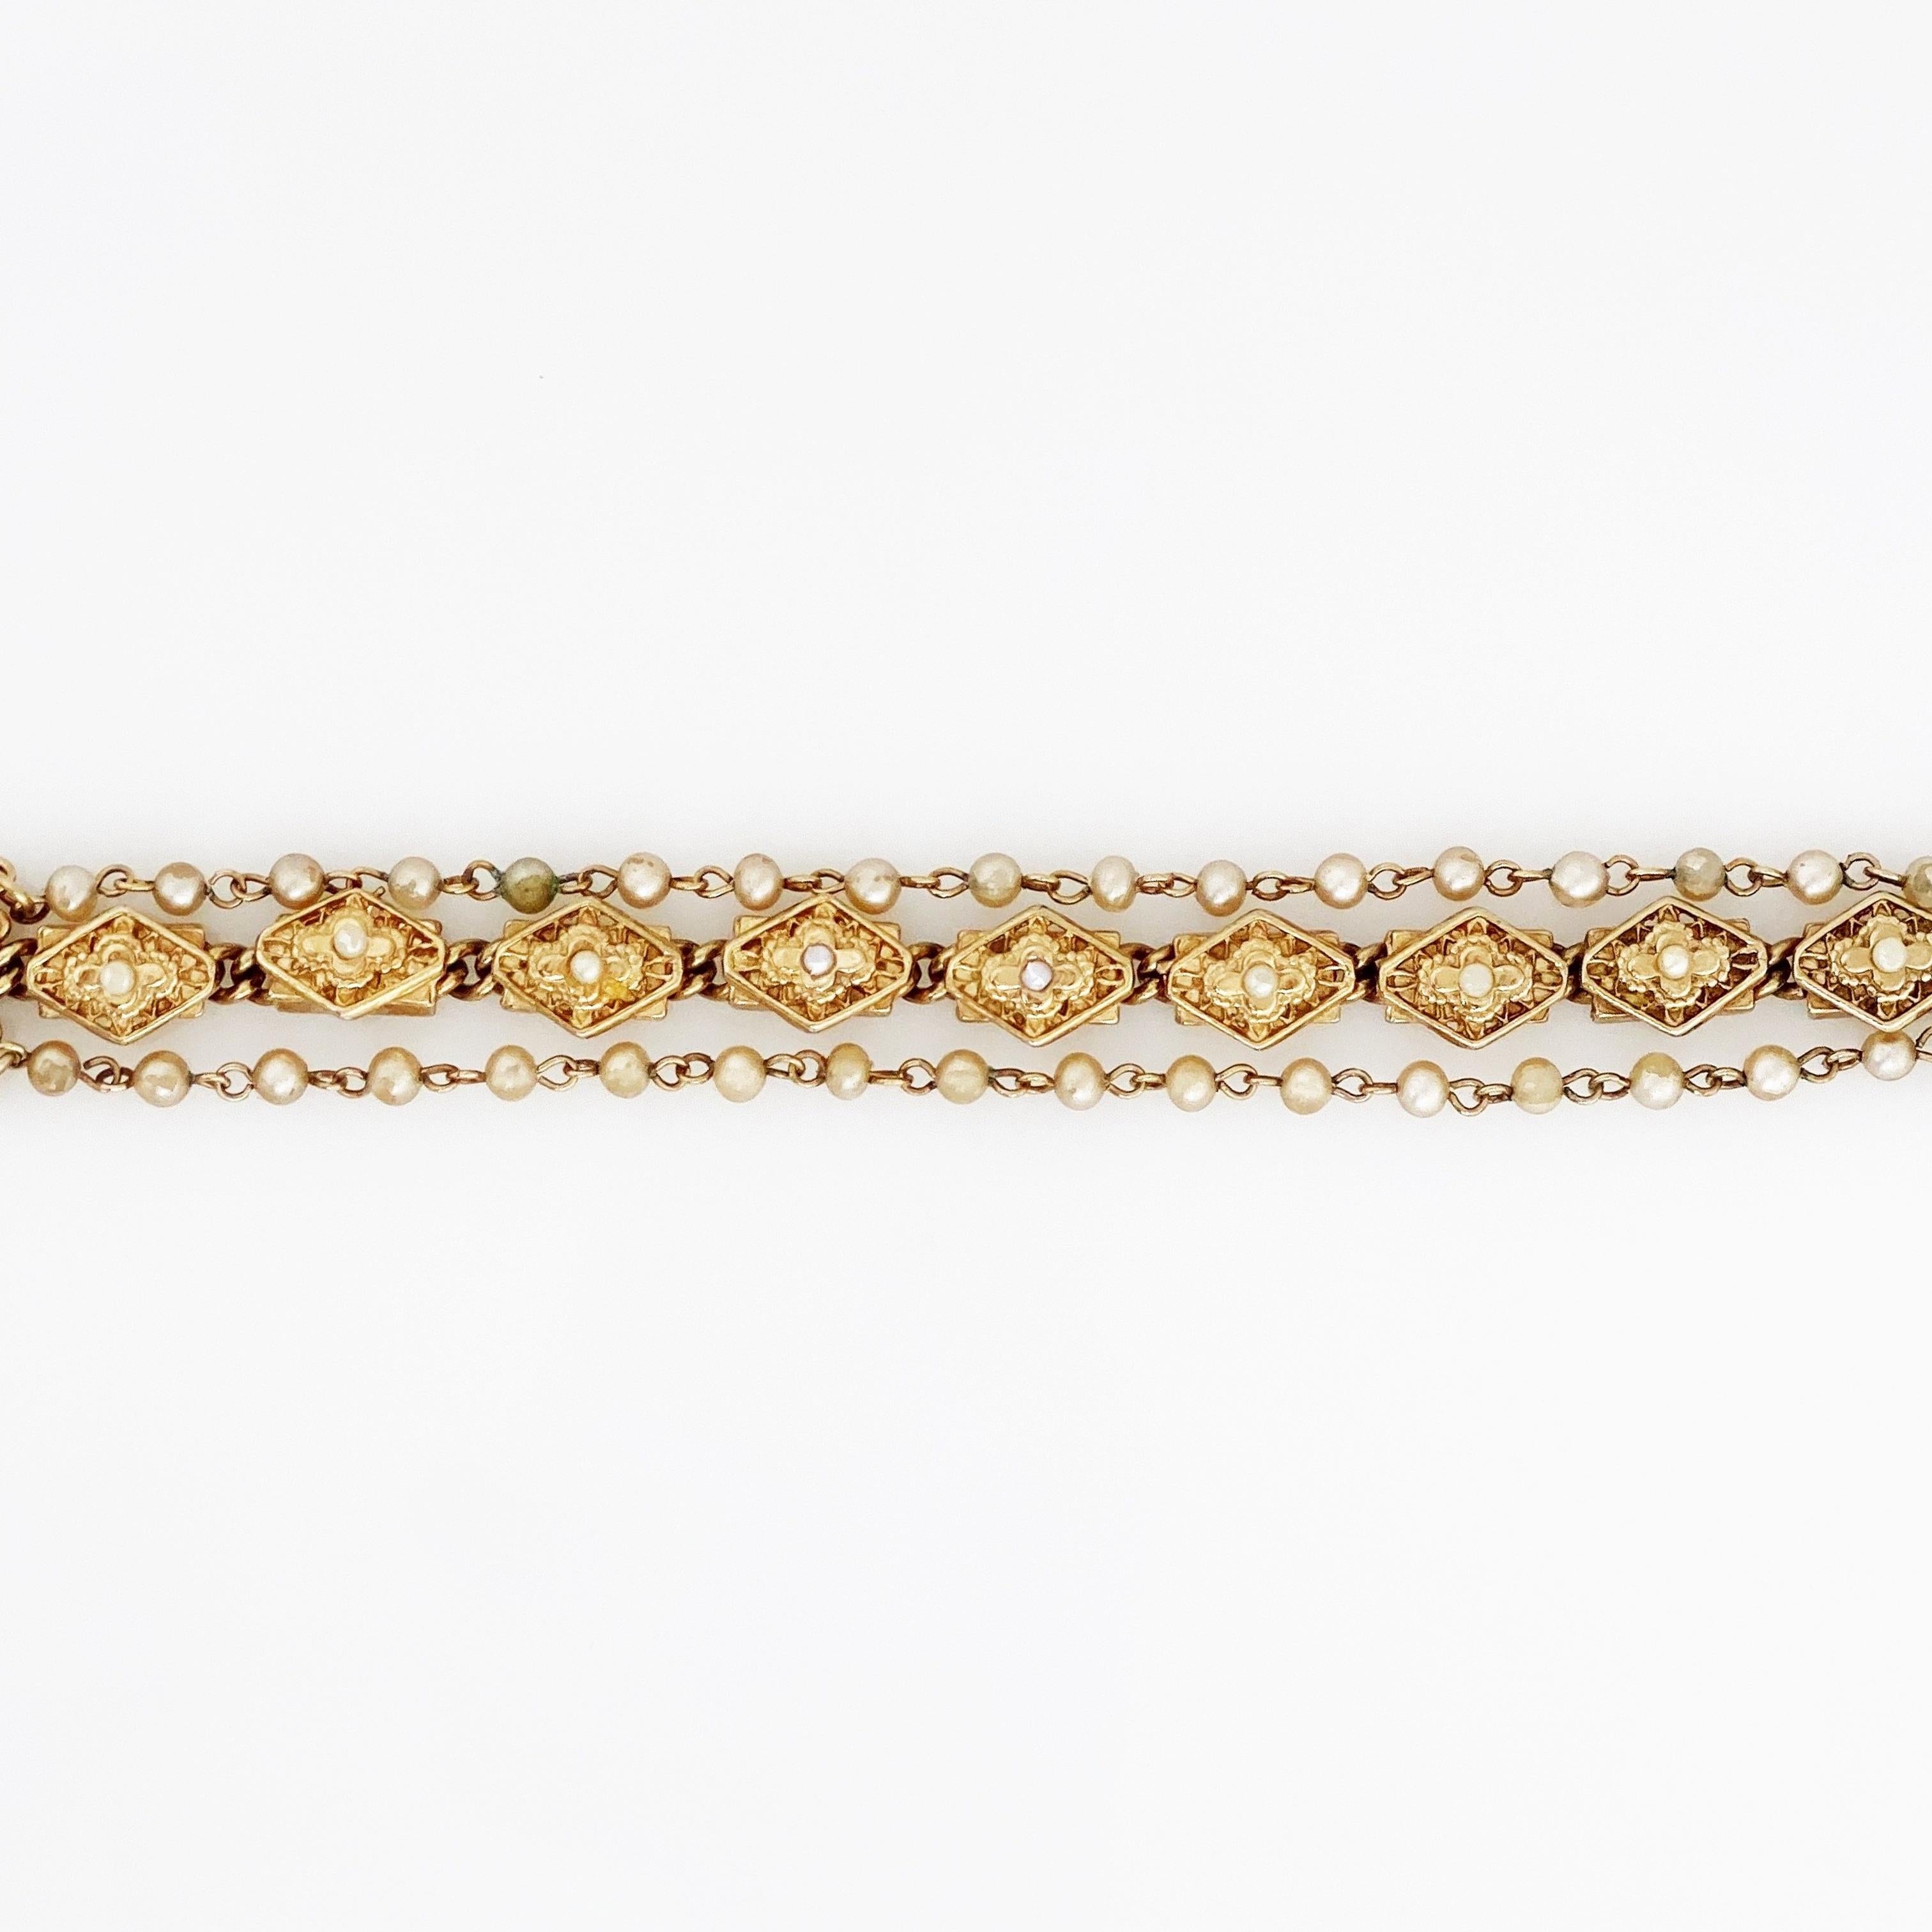 Modern Victorian Style Three Strand Bracelet with Seed Pearls by Reinad, 1940s